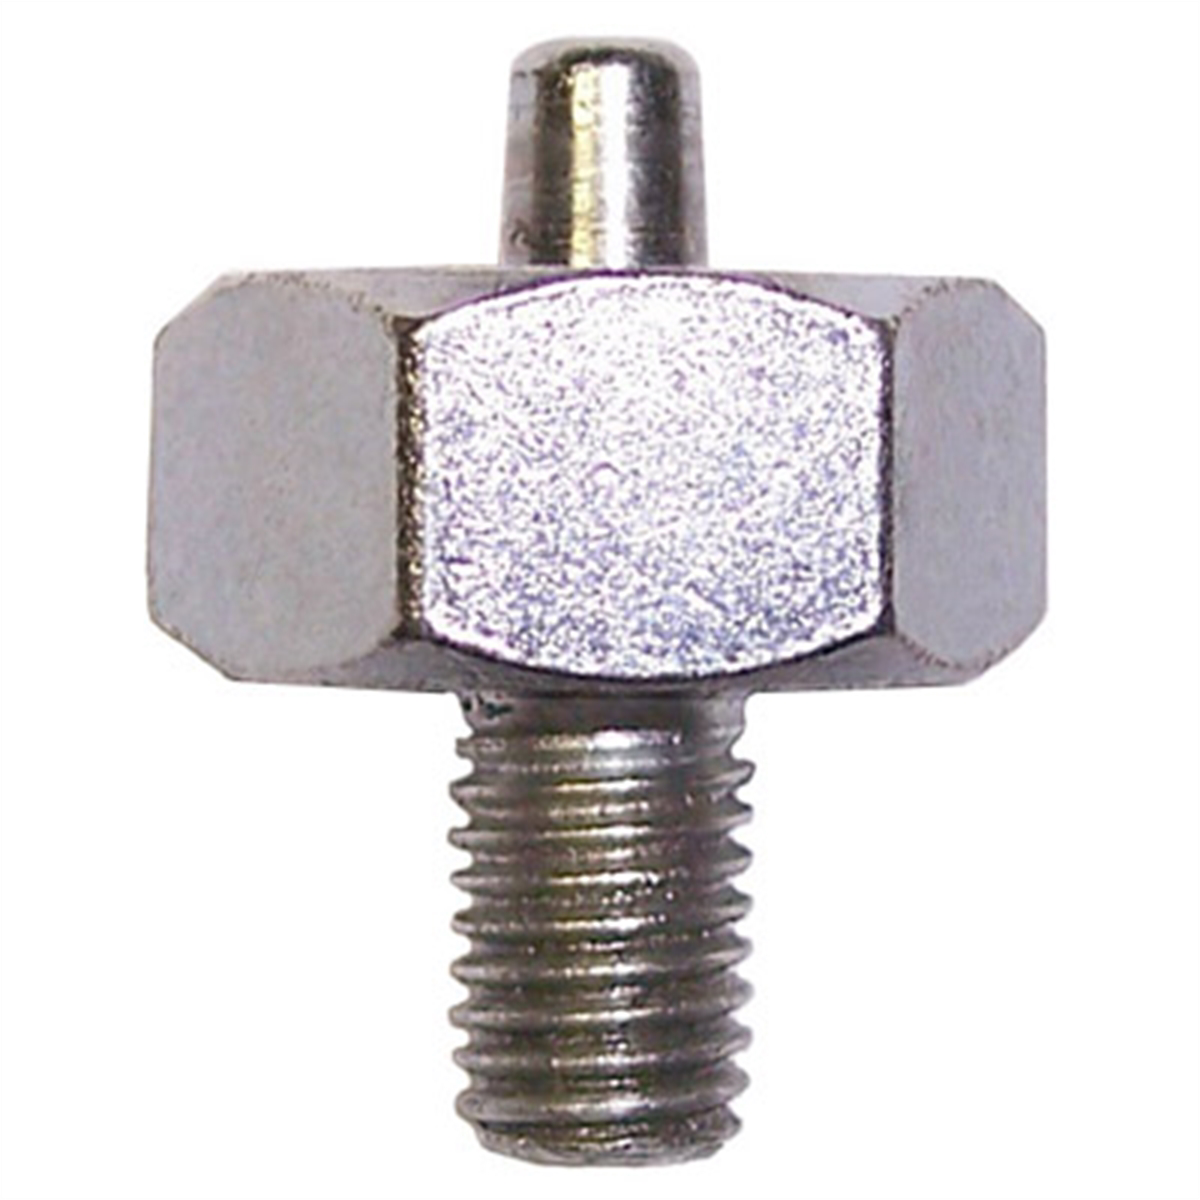 4.75mm Adapter For 14825 Flaring Tool Kit